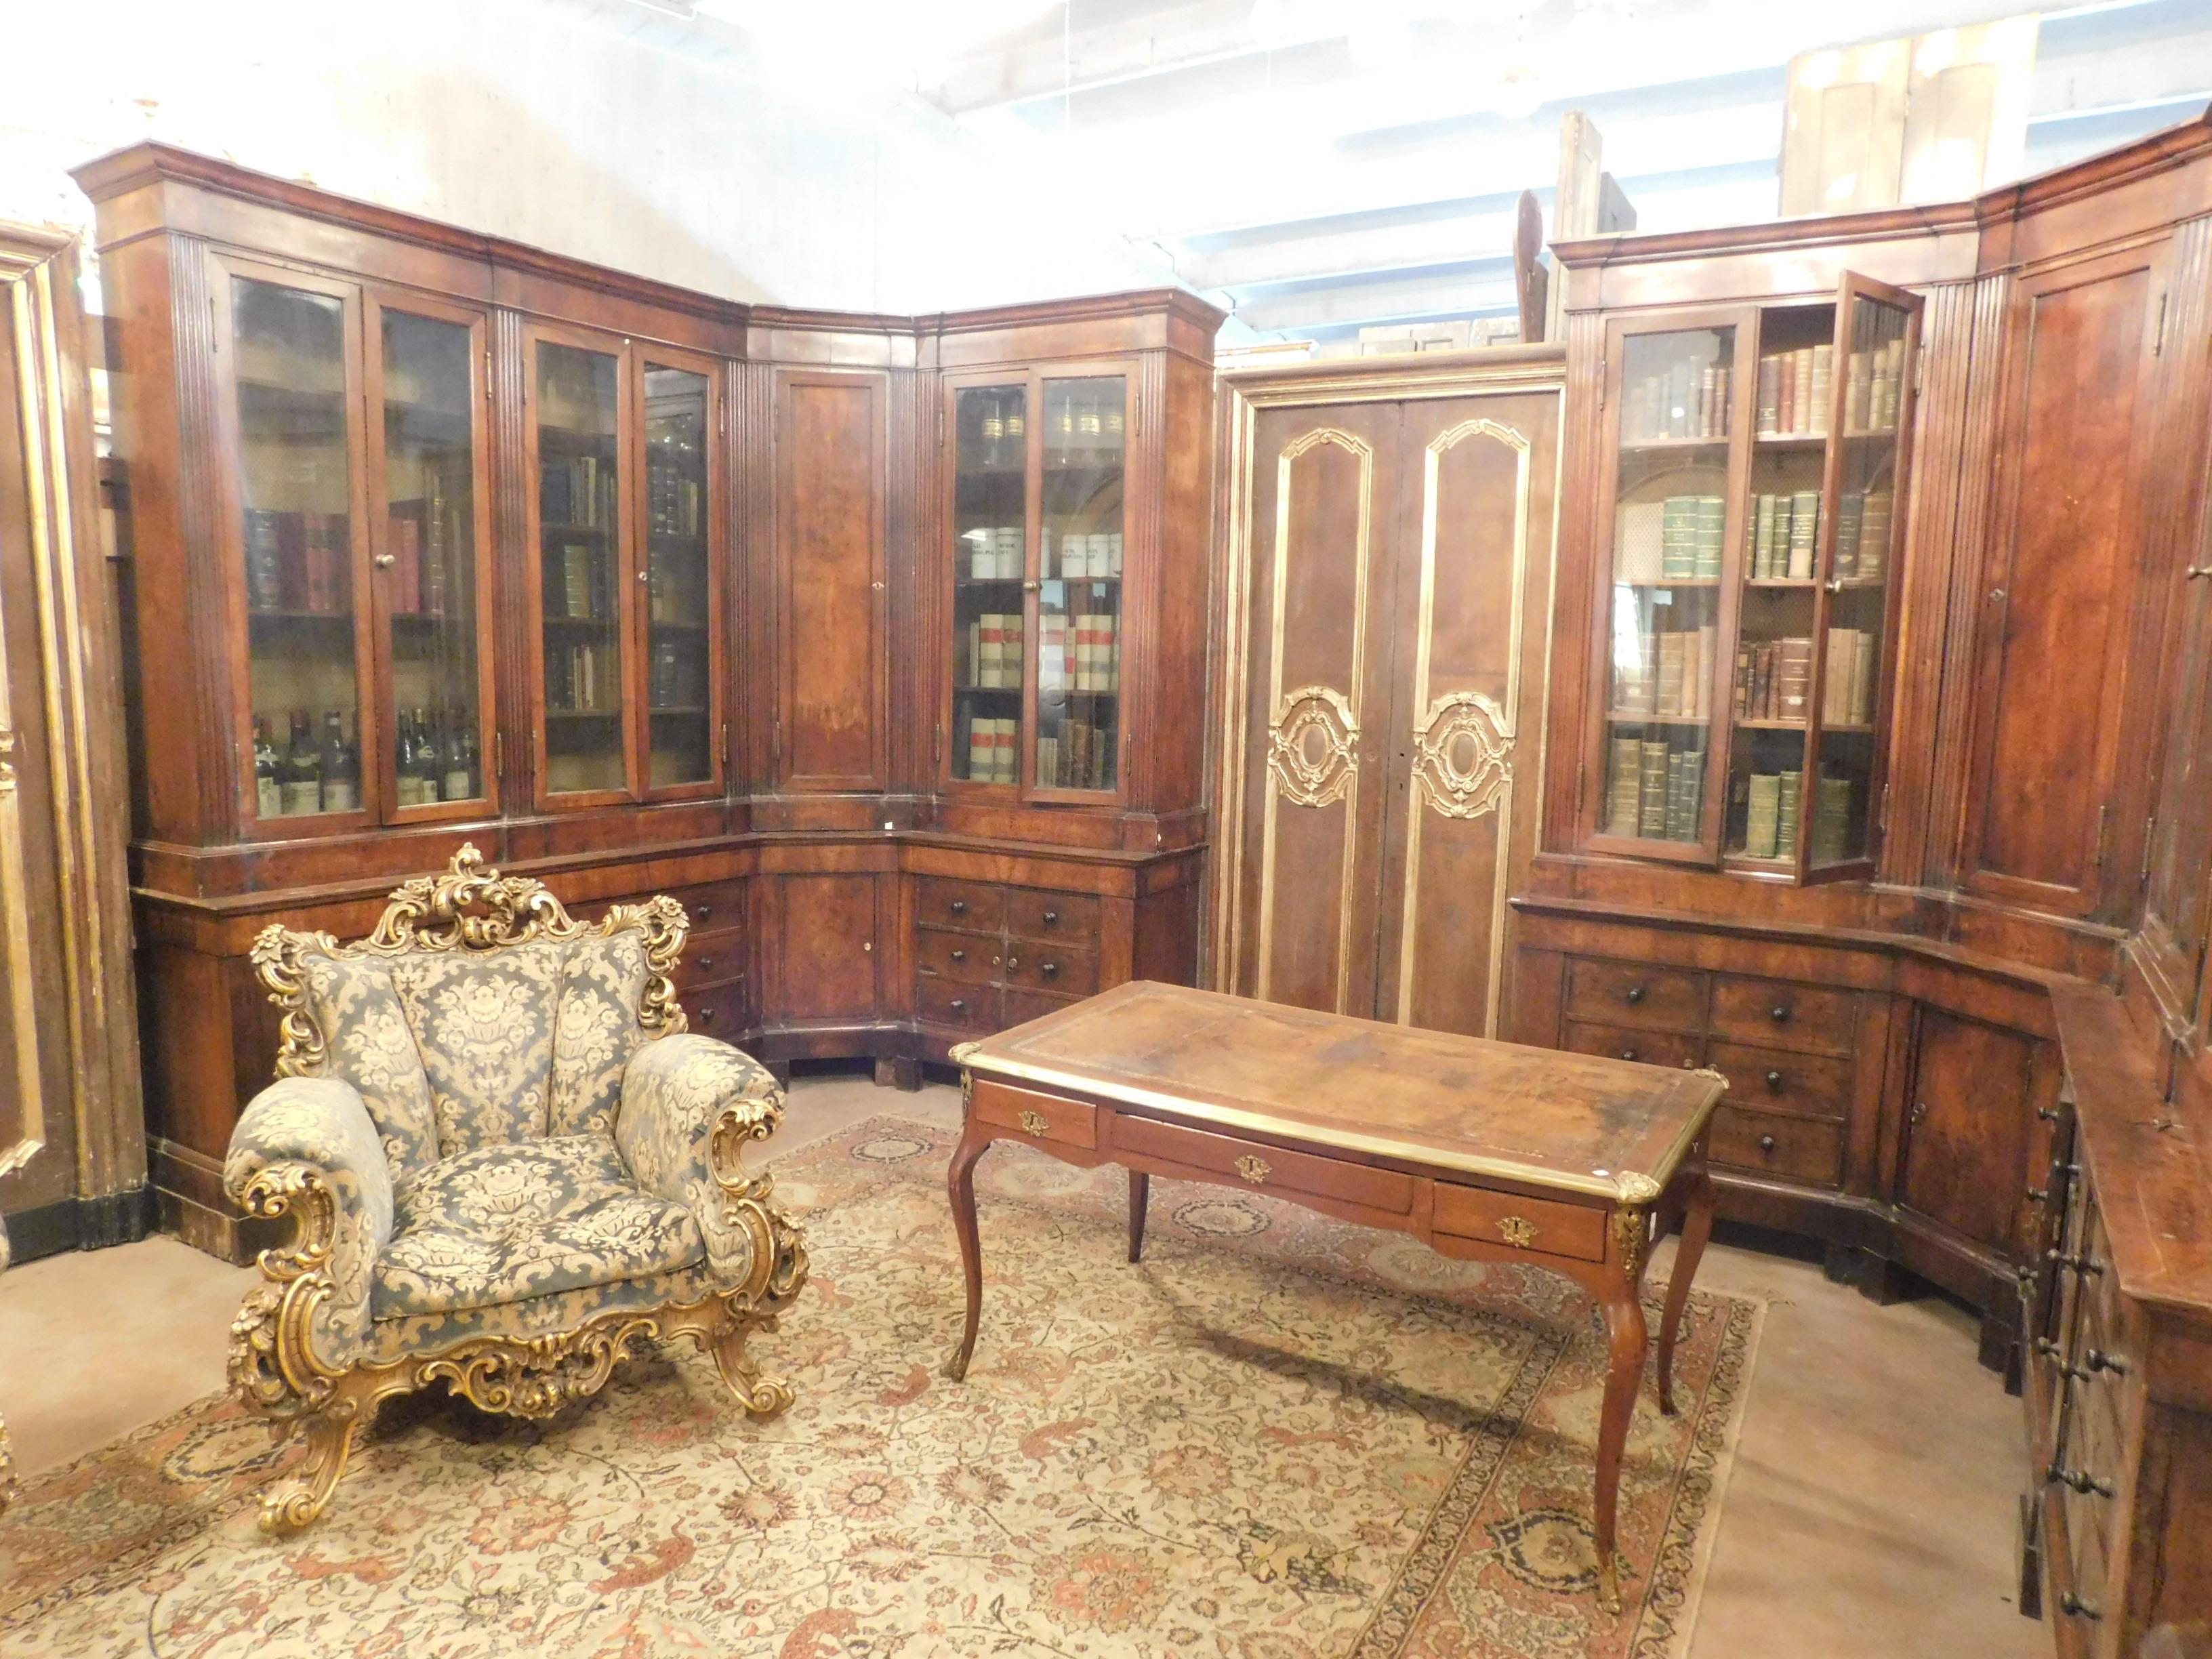 Antique pharmacy used as a library, complete and in excellent conditions, original glasses for the windows,
with drawers turned into doors, formed by two bodies in walnut, restored.
If you want there are the matching doors.